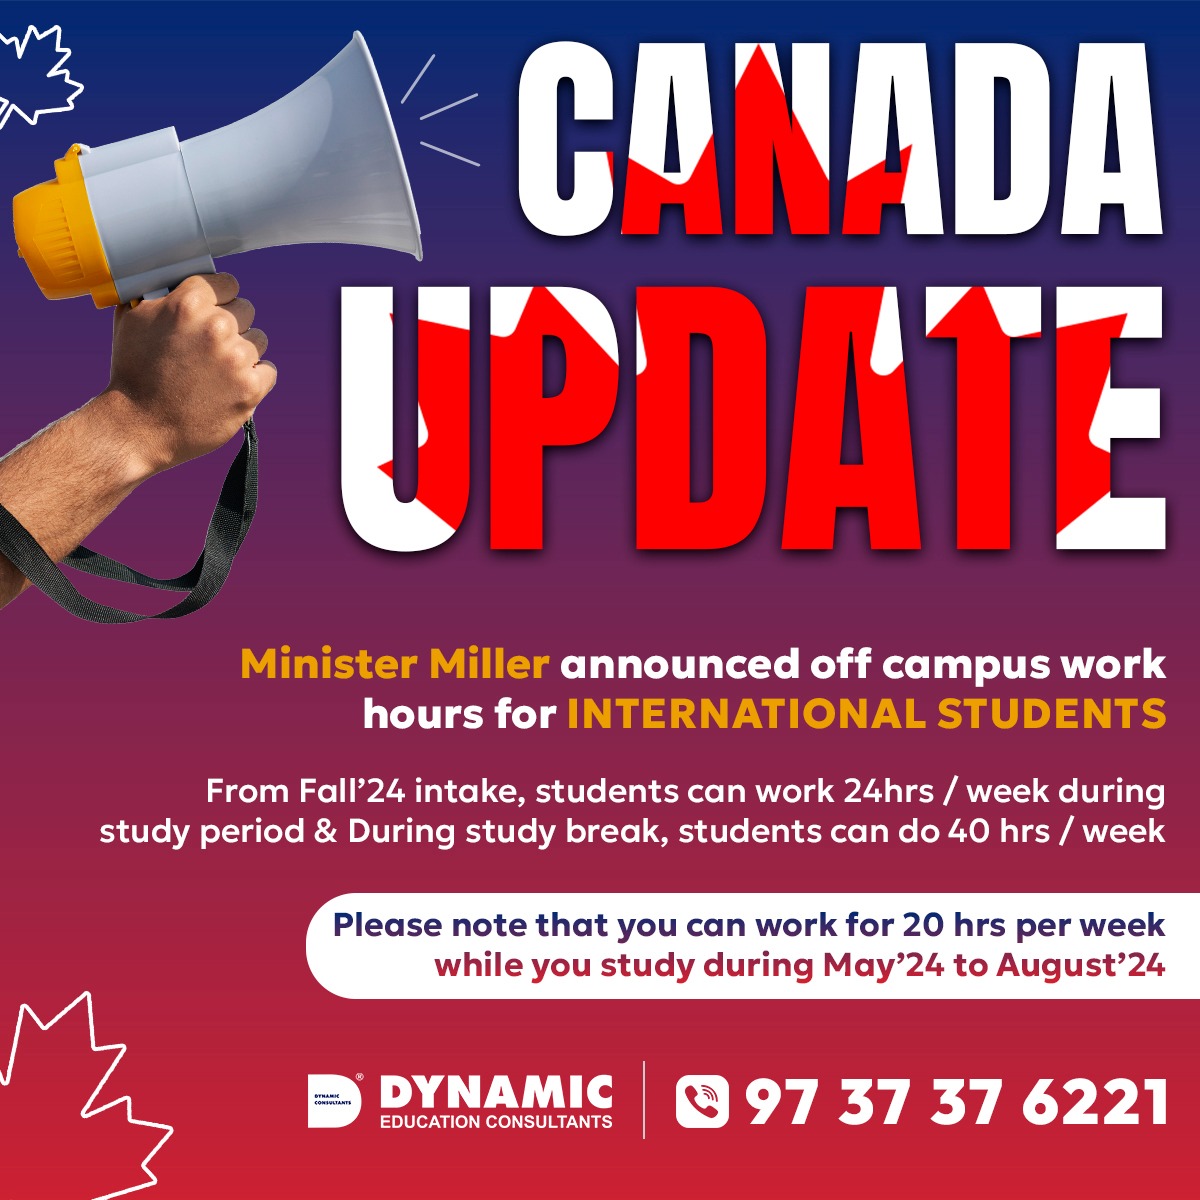 𝐁𝐫𝐞𝐚𝐤𝐢𝐧𝐠 𝐍𝐞𝐰𝐬!

Update for 𝐂𝐚𝐧𝐚𝐝𝐚 𝐀𝐬𝐩𝐢𝐫𝐚𝐧𝐭𝐬! 🇨🇦

What’s more? Call on 𝟗𝟕𝟑𝟕𝟑𝟕𝟔𝟐𝟐𝟏 to know other 𝐦𝐚𝐣𝐨𝐫 𝐜𝐡𝐚𝐧𝐠𝐞𝐬.

#BharosaMatlabDynamic #StudyAbroad #CareerGoals #CanadaImmigration #StudyInCanada #CanadaNews #CanadaUpdate #StudentWork